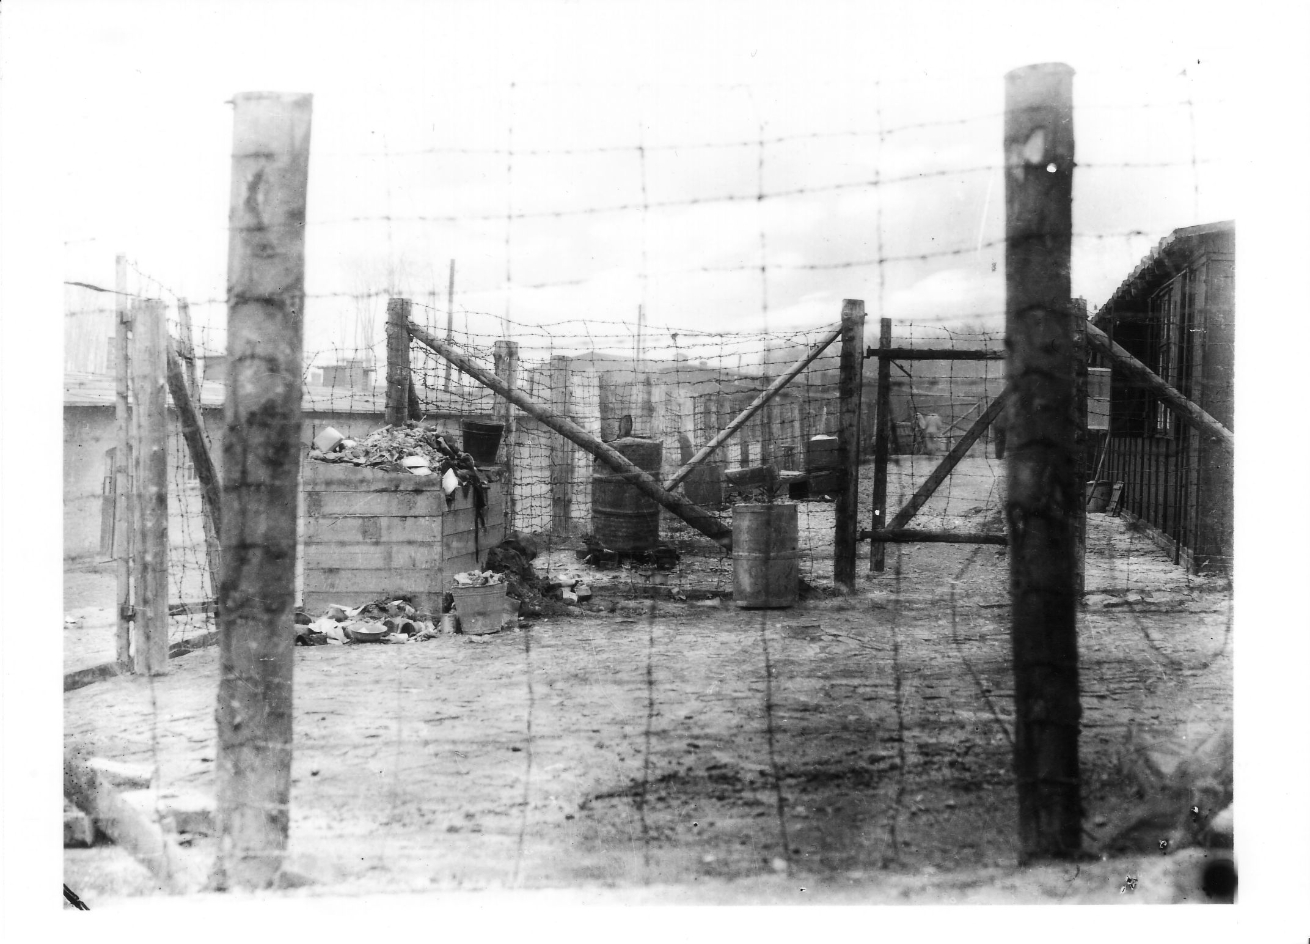 Block 54 on the right, Block 60 in the background, the latrine building on the left. A container full of garbage and several barrels. Photographed through a simple wire fence made of rough beams.